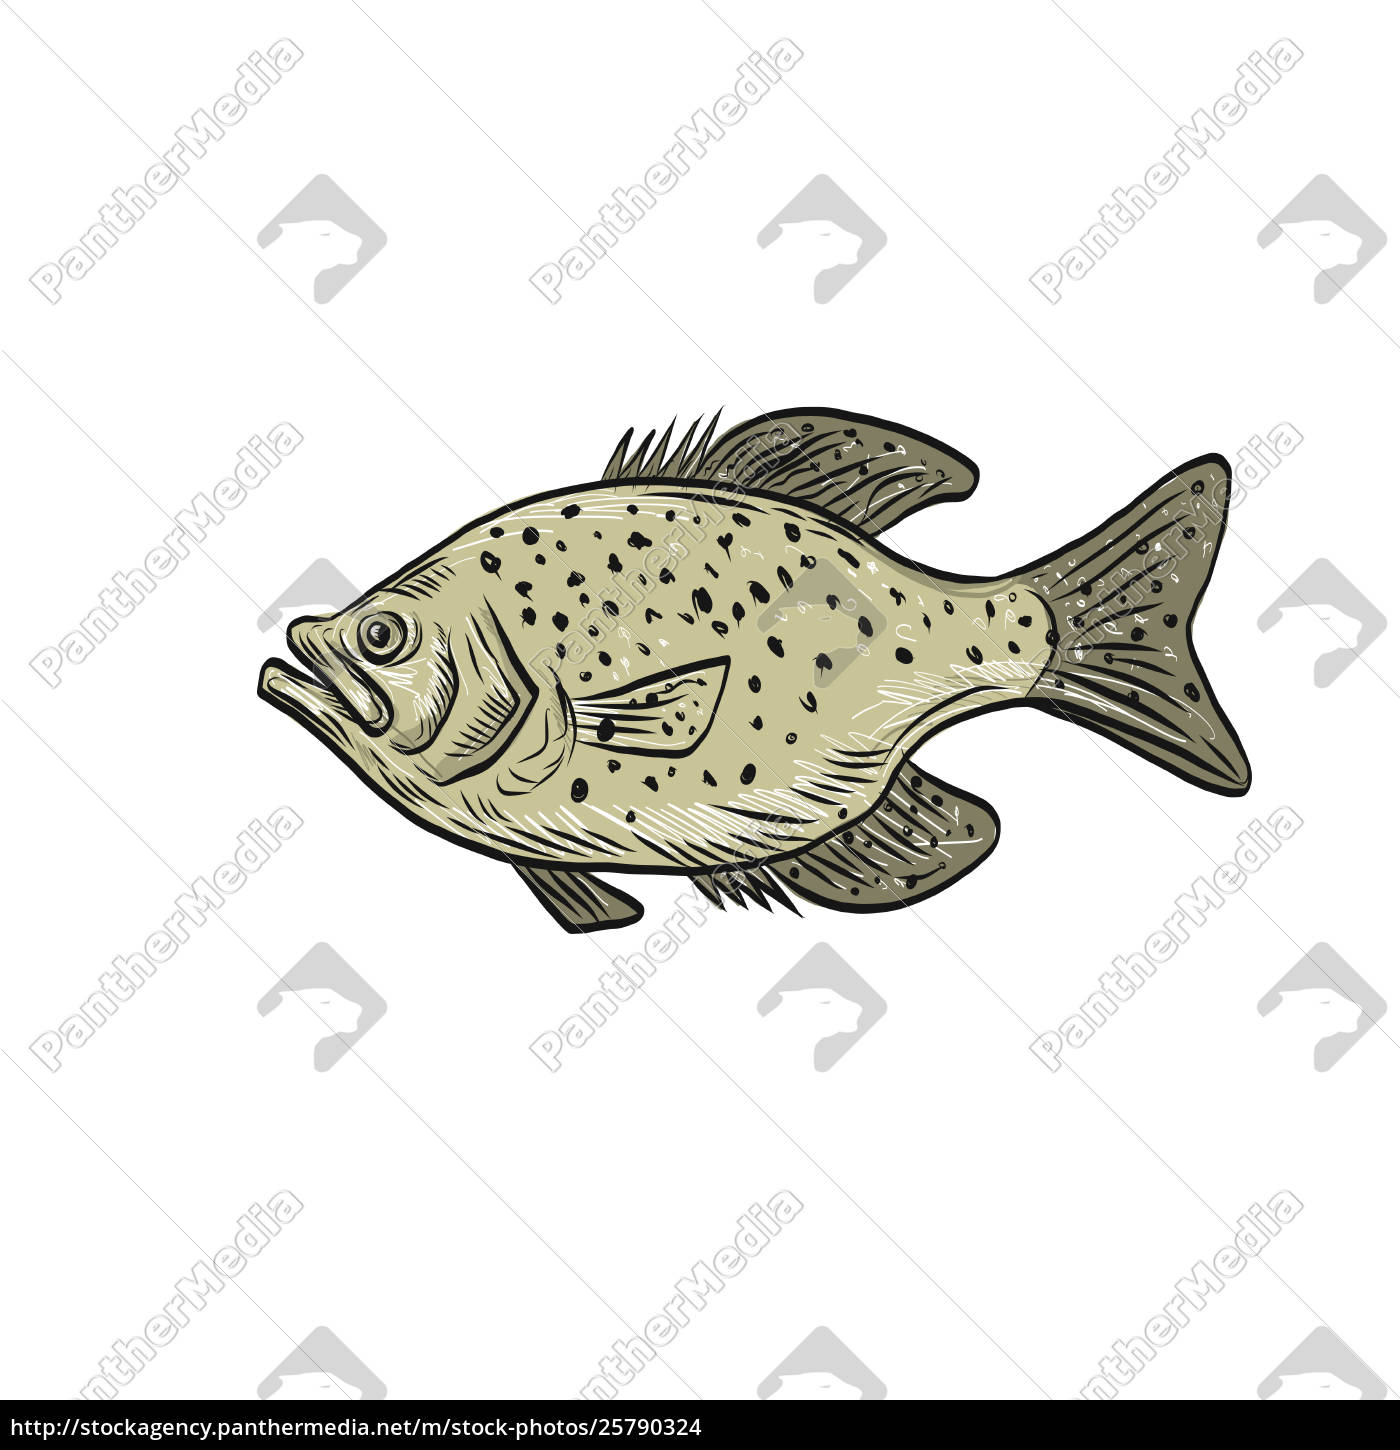 Crappie Fish Side Drawing - Royalty free photo #25790324